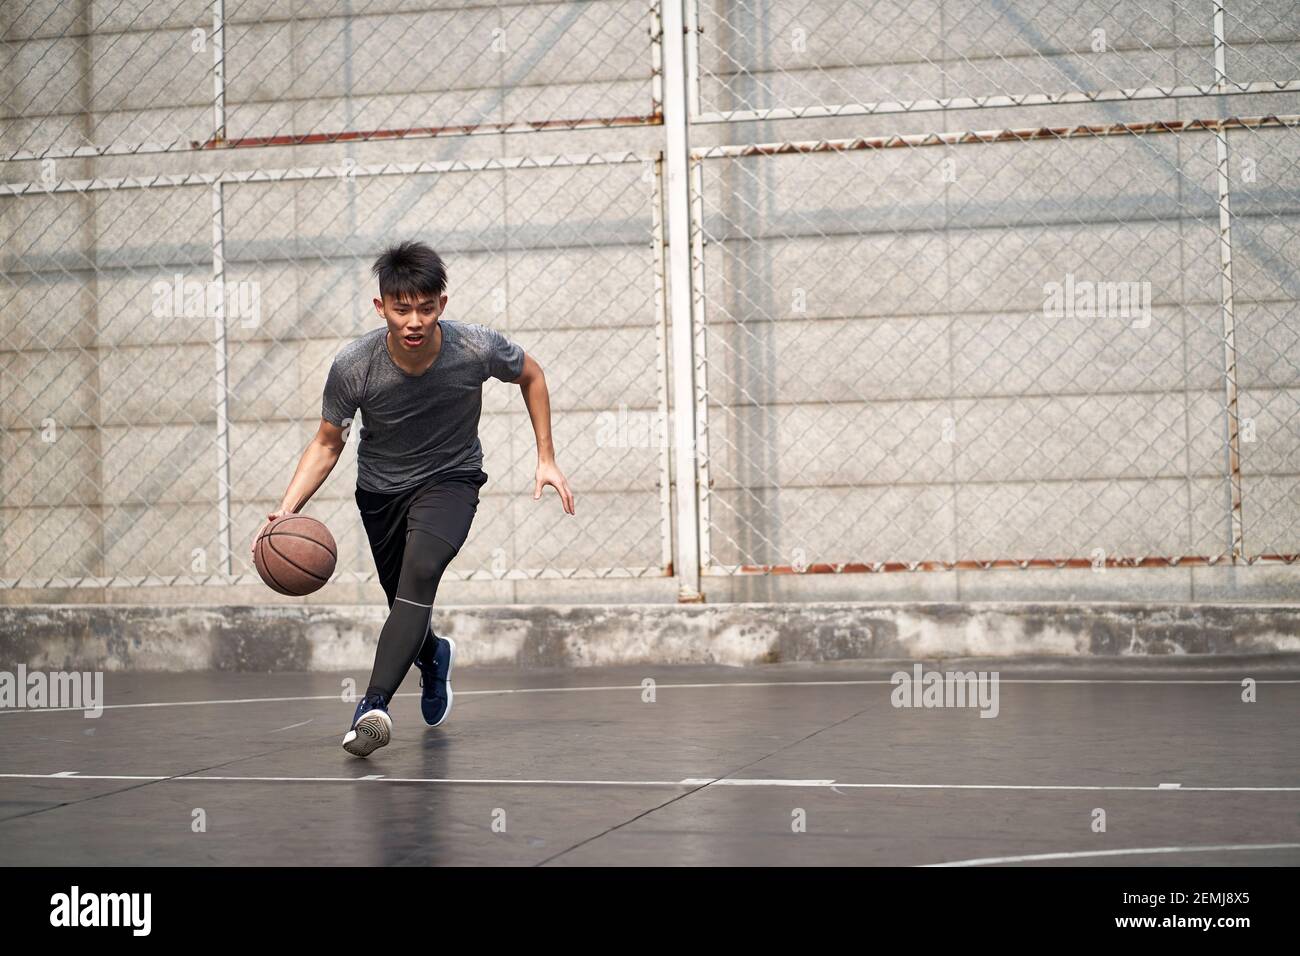 young asian man basketball player attempting a dunk on outdoor court Stock Photo